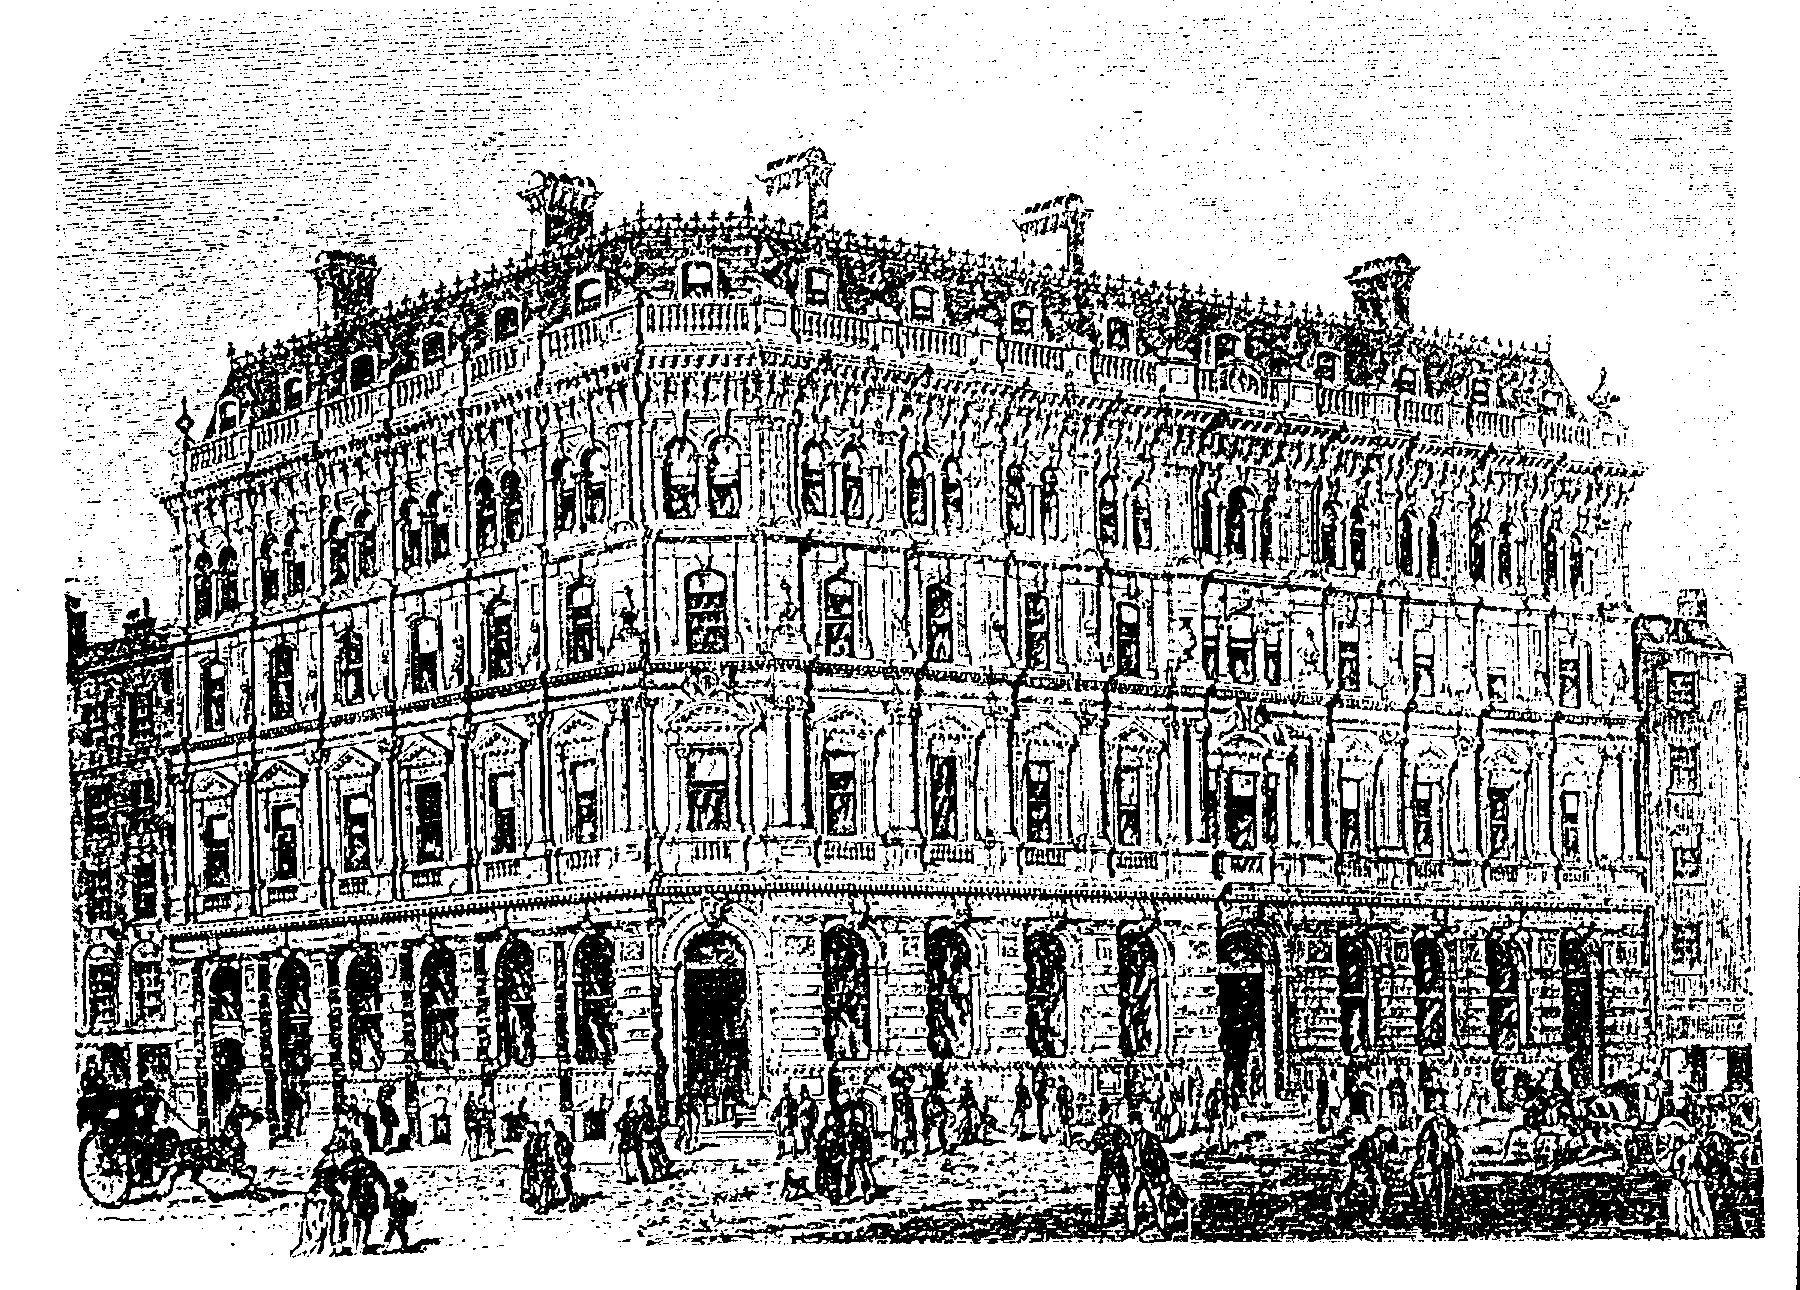 Fig. 13. drawing of the offices erected by the
City Offices Company on the corner of Gracechurch Street and
Lombard Street, c. 1870